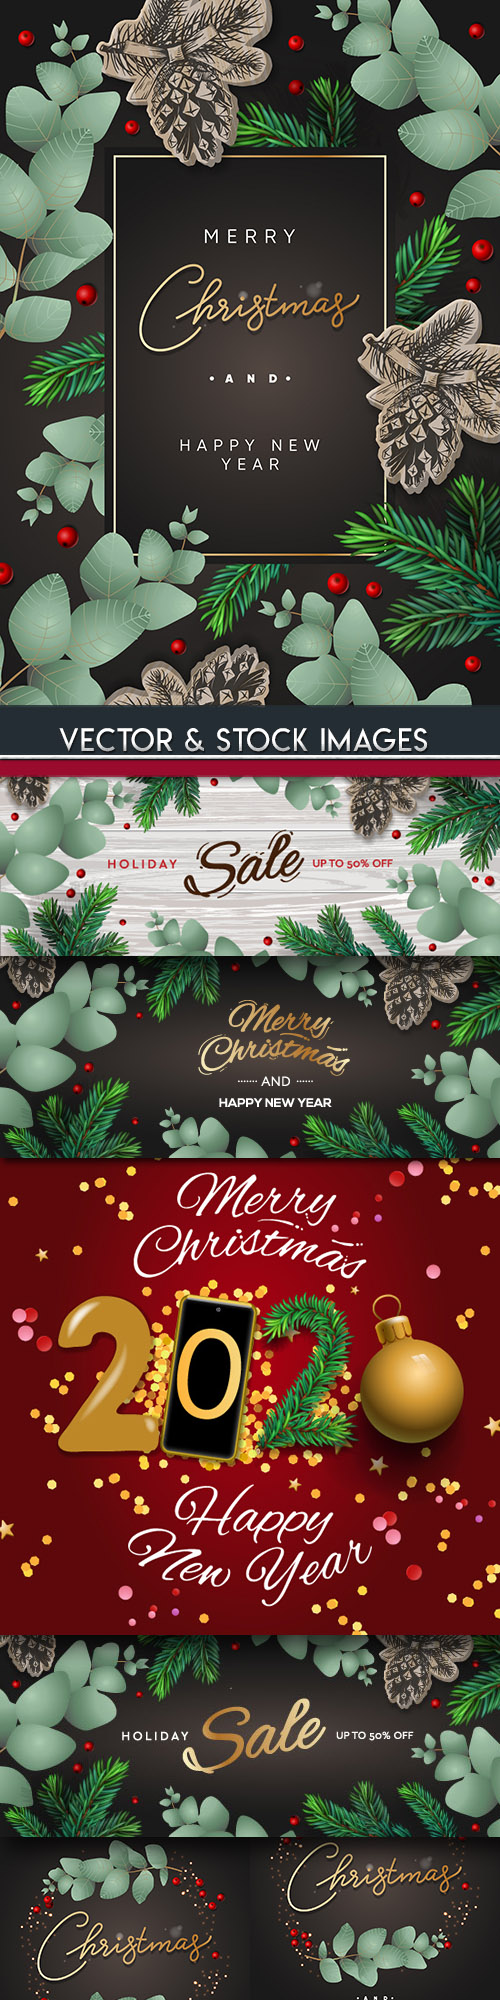 Merry Christmas and New Year background decorative 4